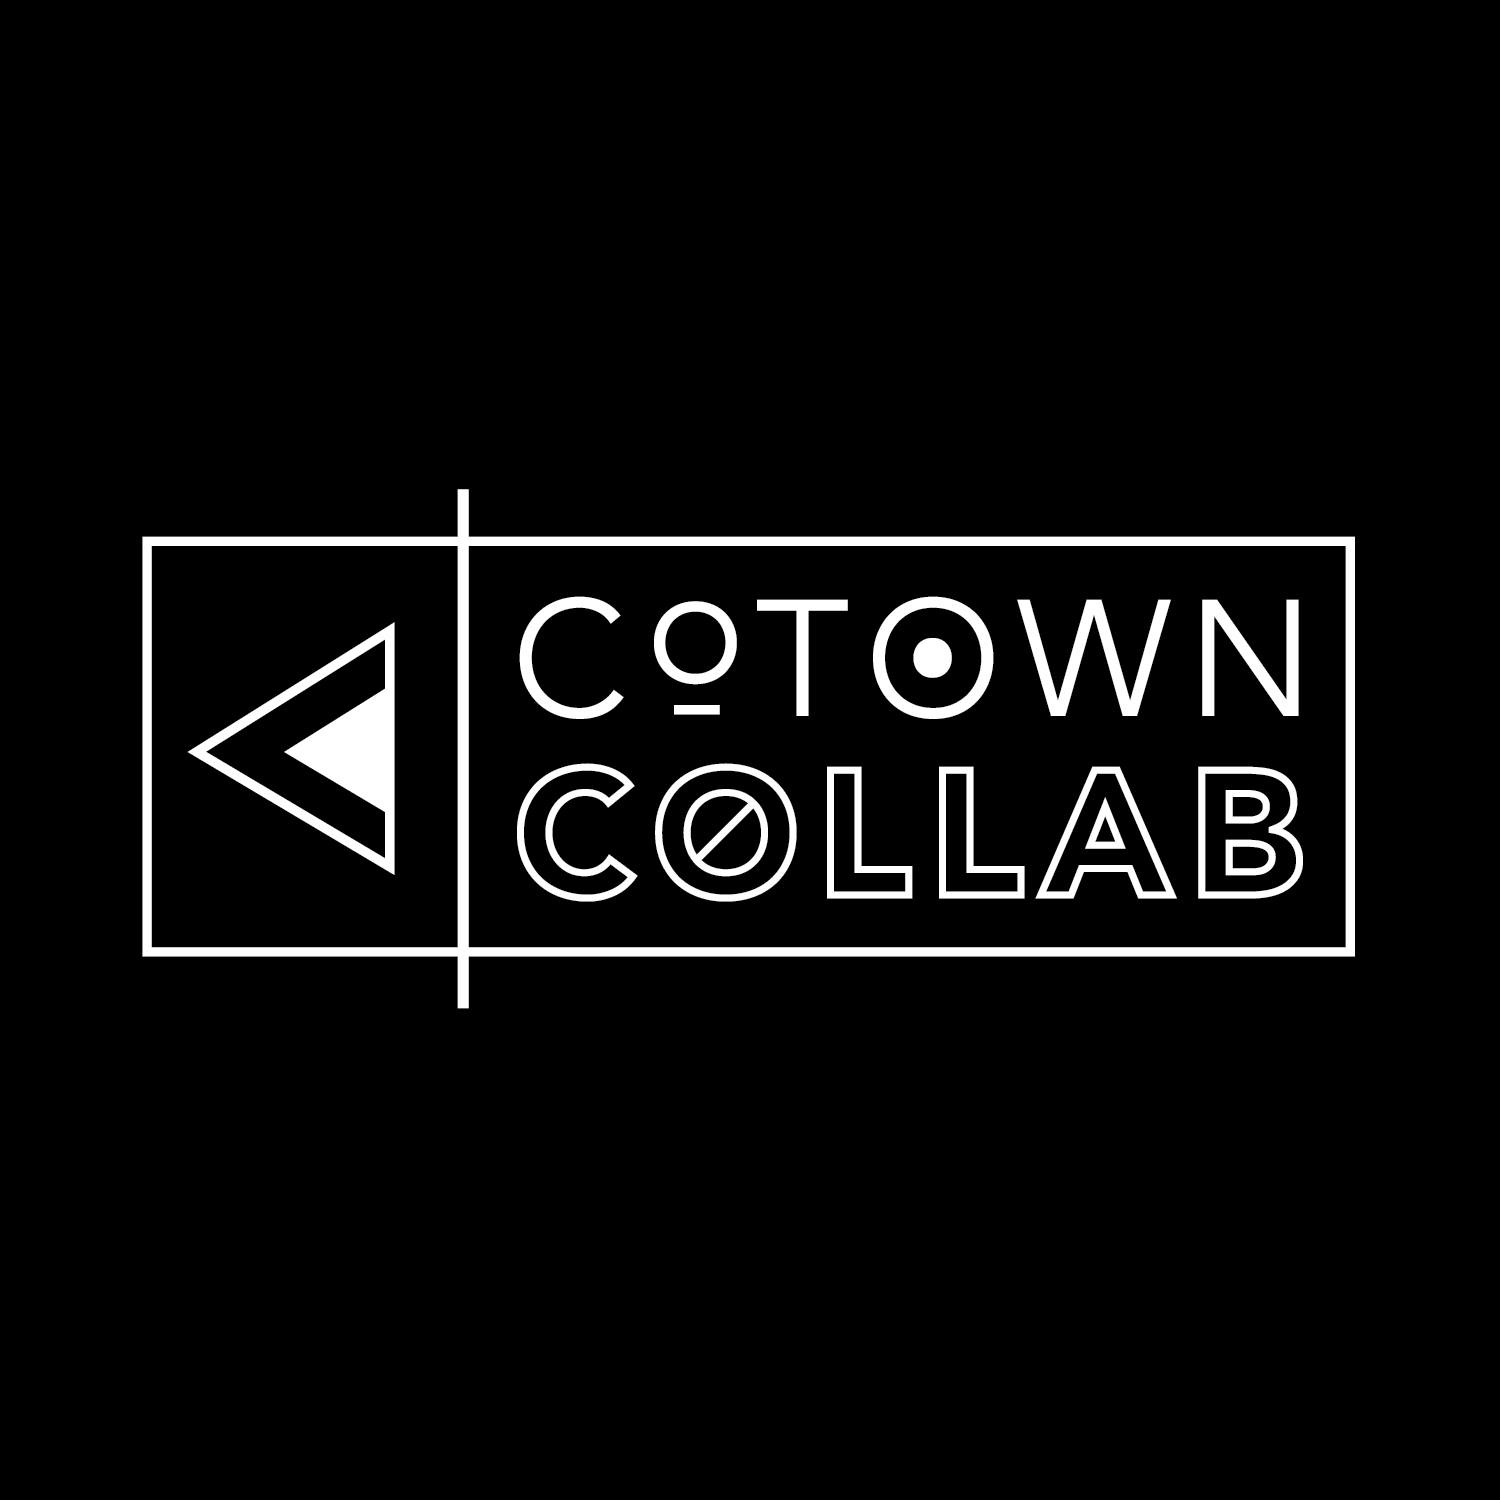 Cotown-Collab